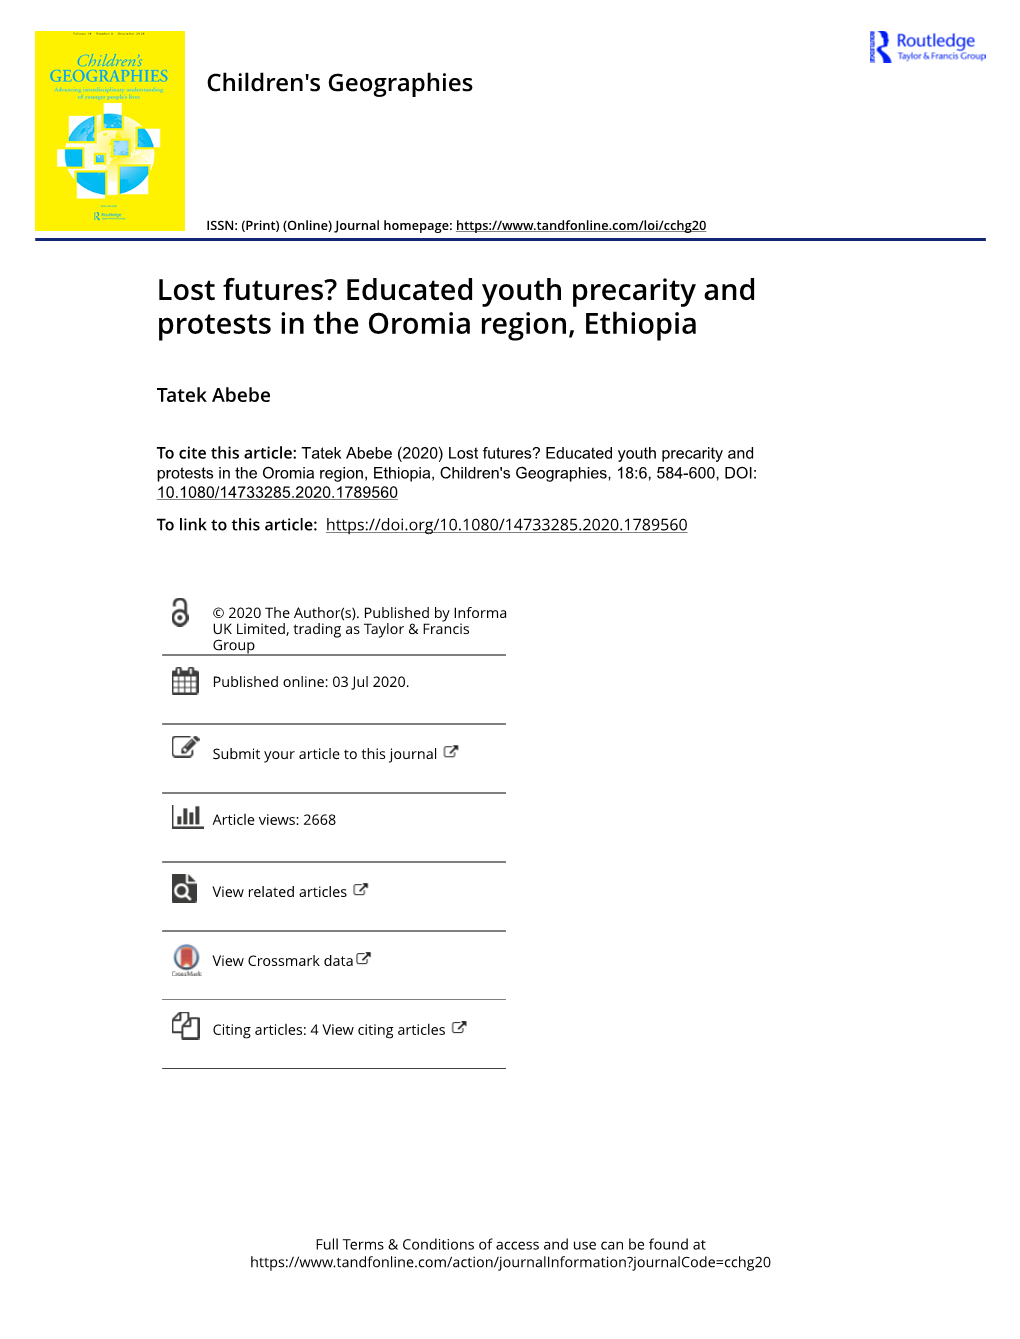 Educated Youth Precarity and Protests in the Oromia Region, Ethiopia